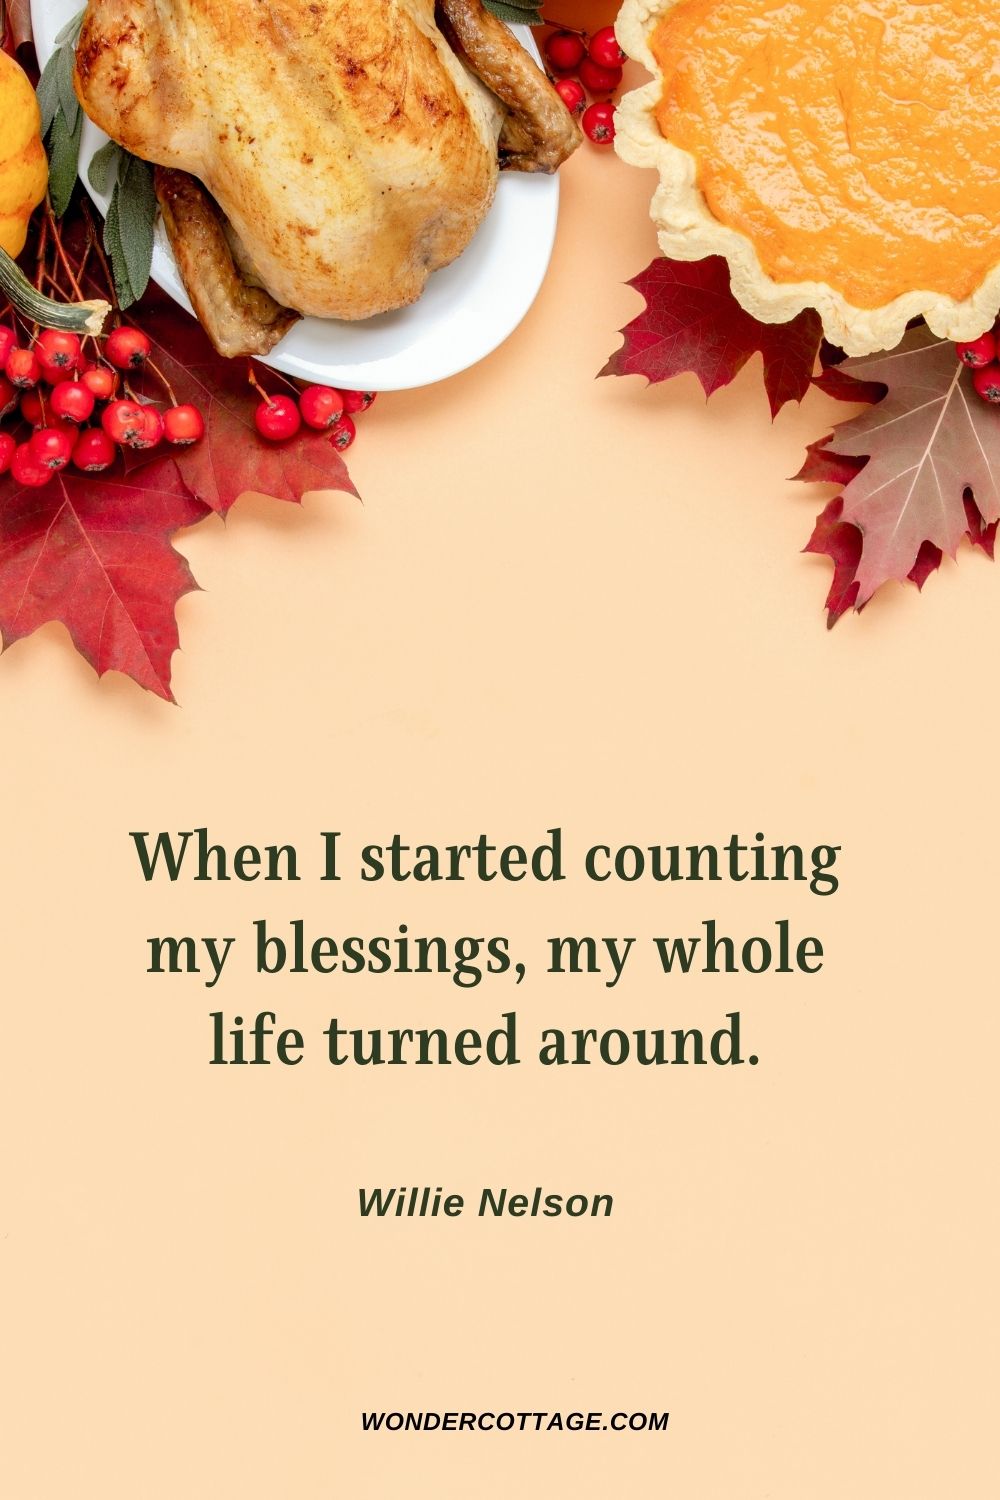 When I started counting my blessings, my whole life turned around. Willie Nelson